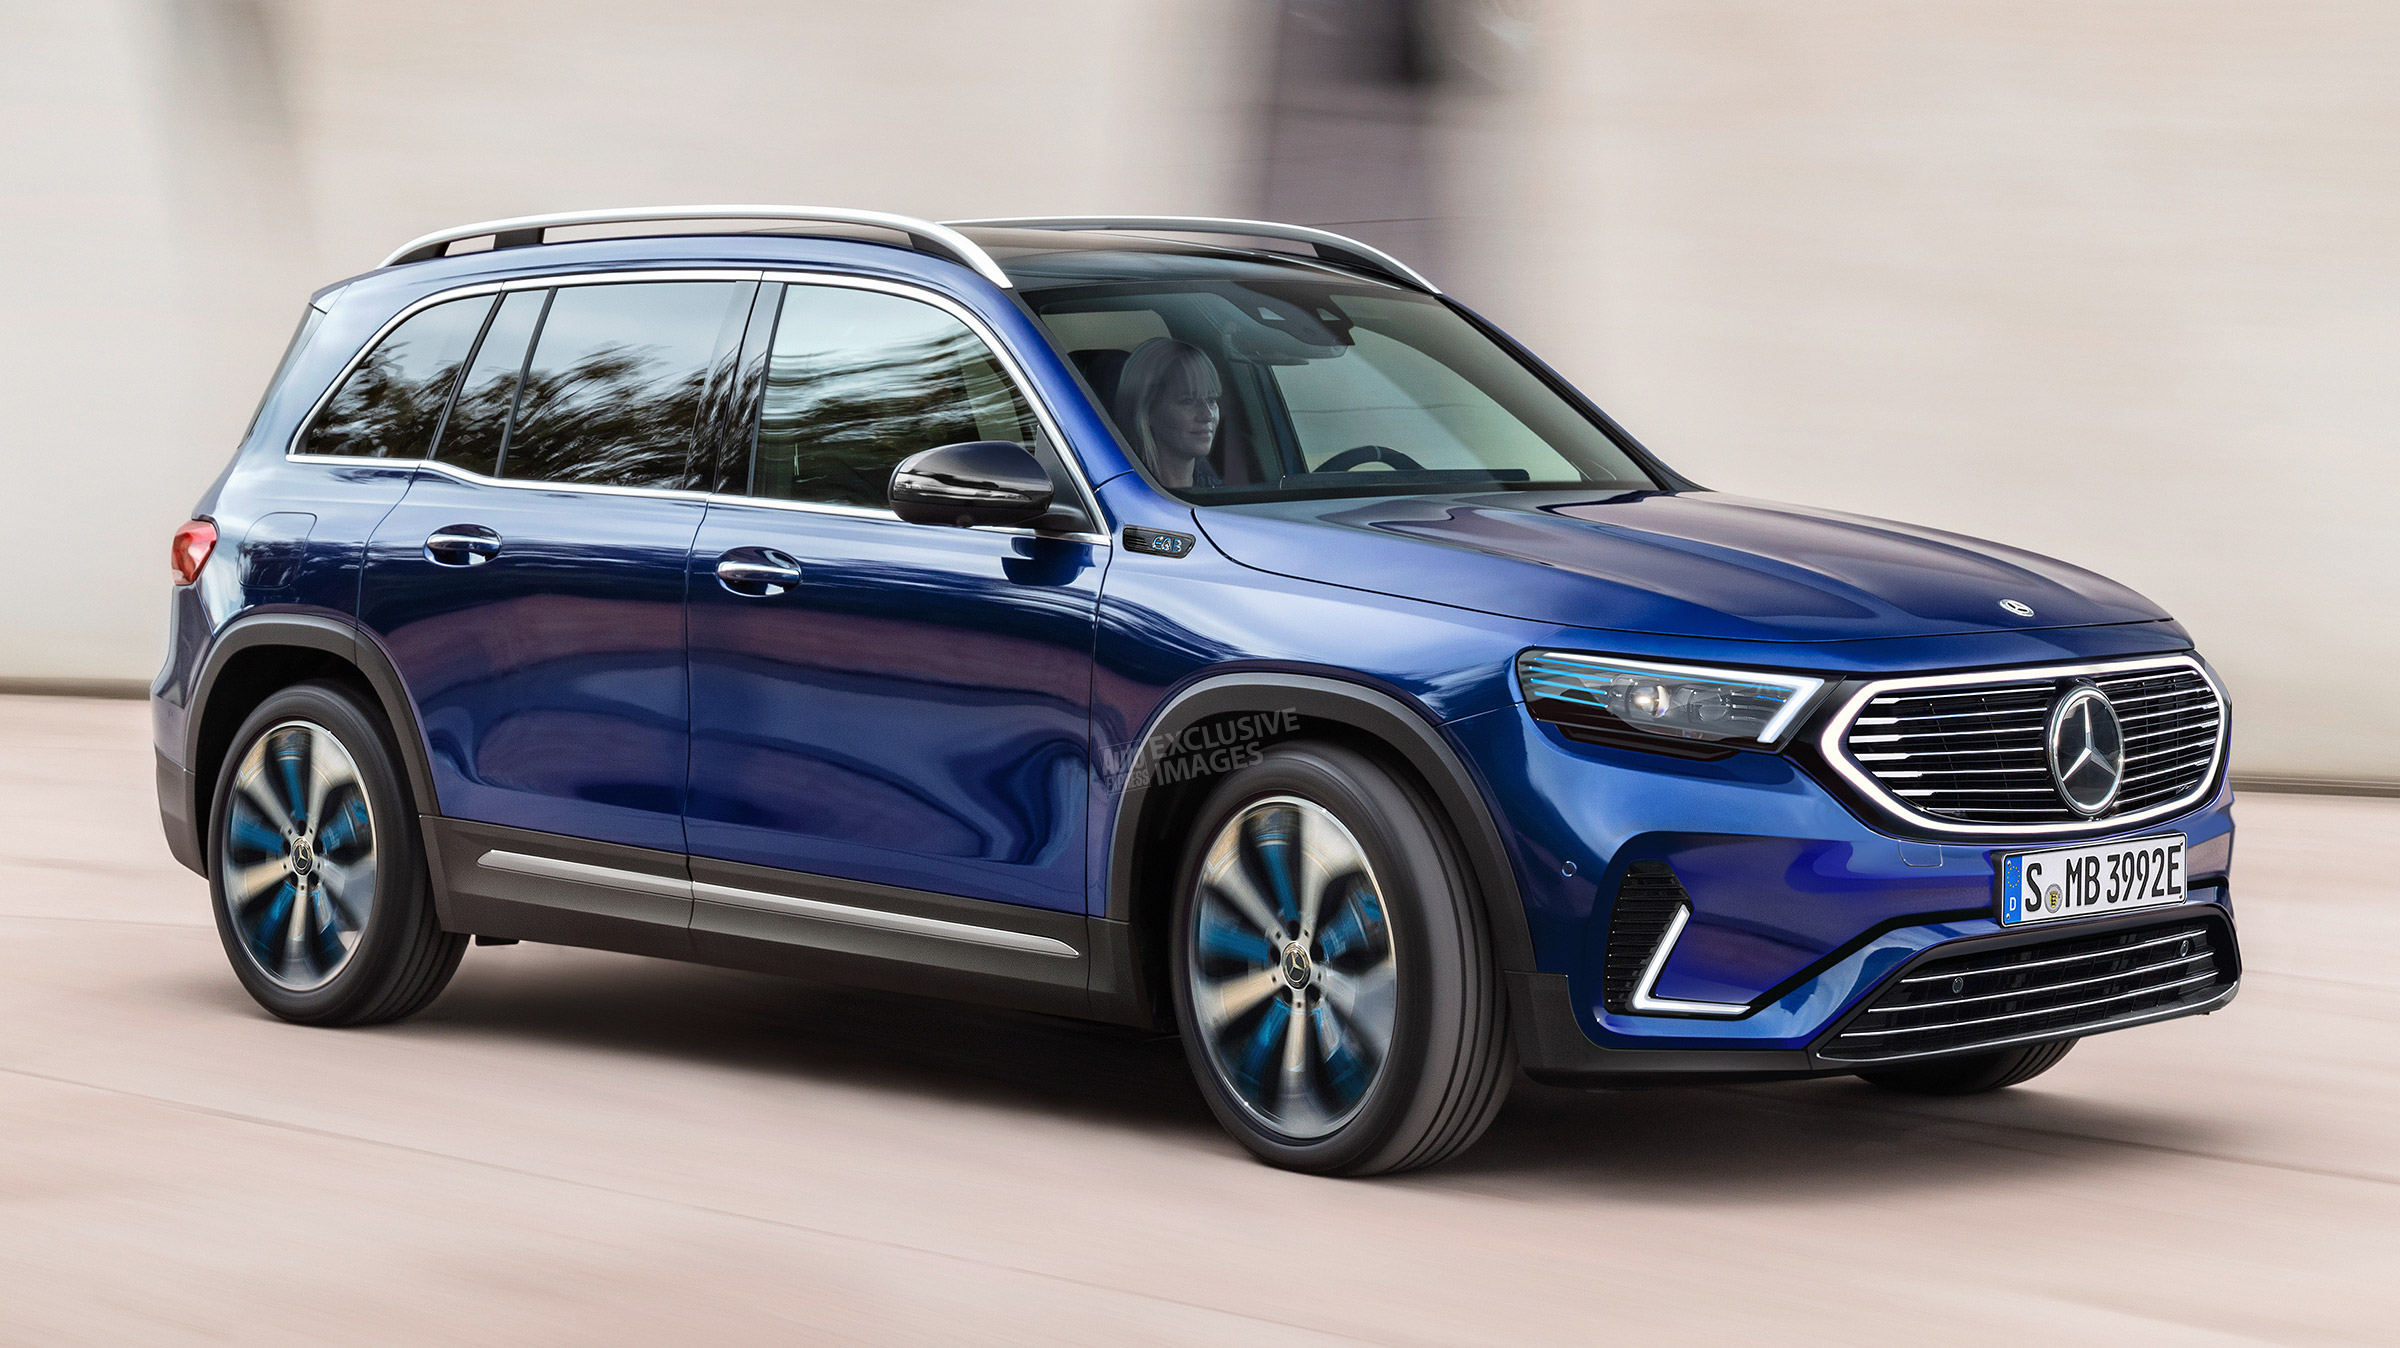 New 2021 Mercedes EQB SUV to boost brand's electric car lineup Auto